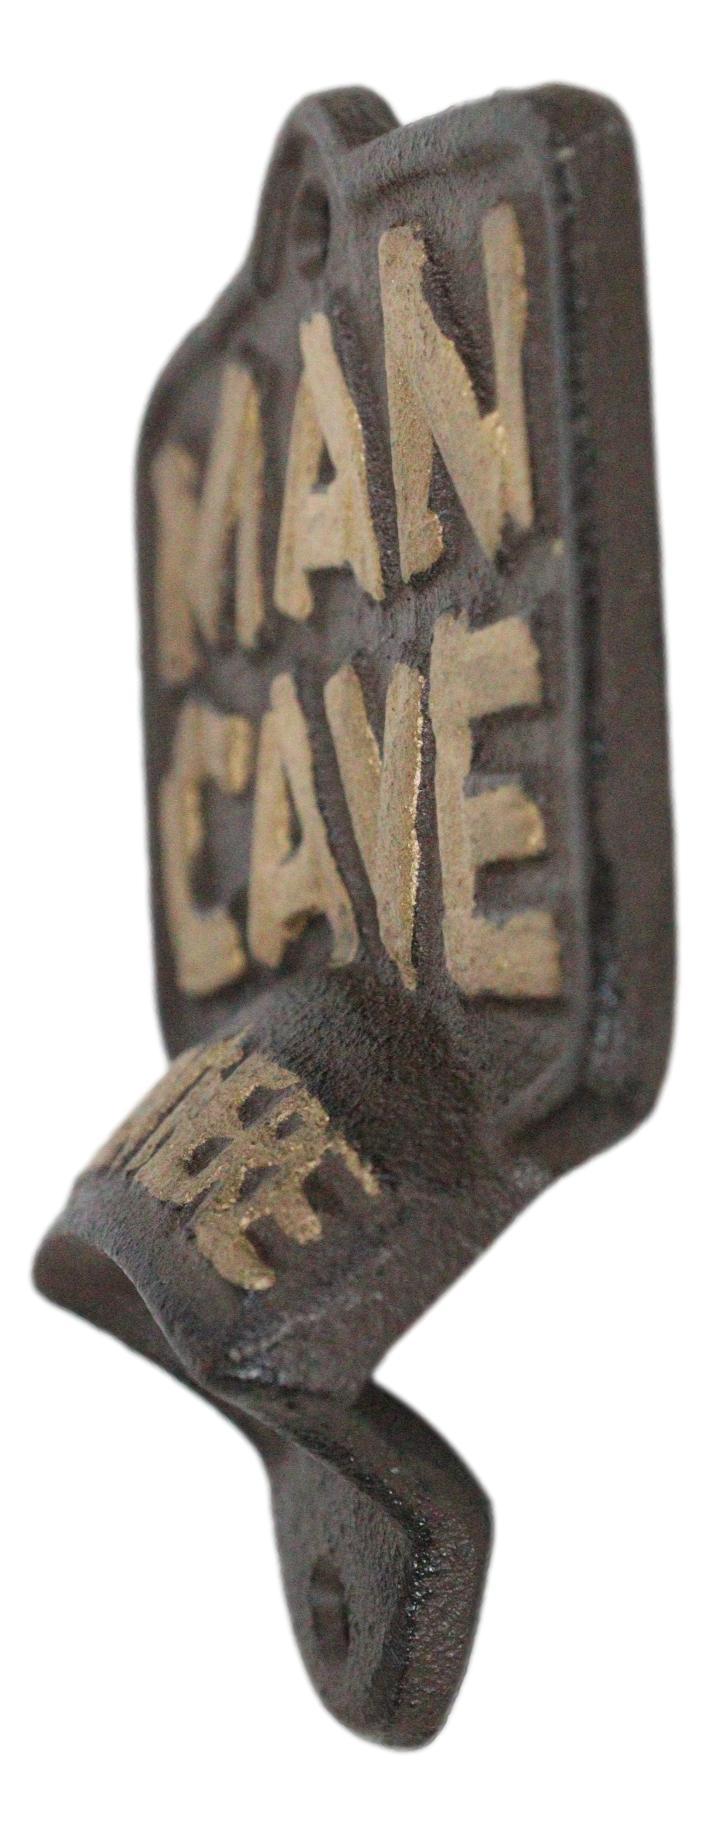 Rustic Man Cave Open Here Cast Iron Bottle Cap Opener Wall Mounted Decor Novelty